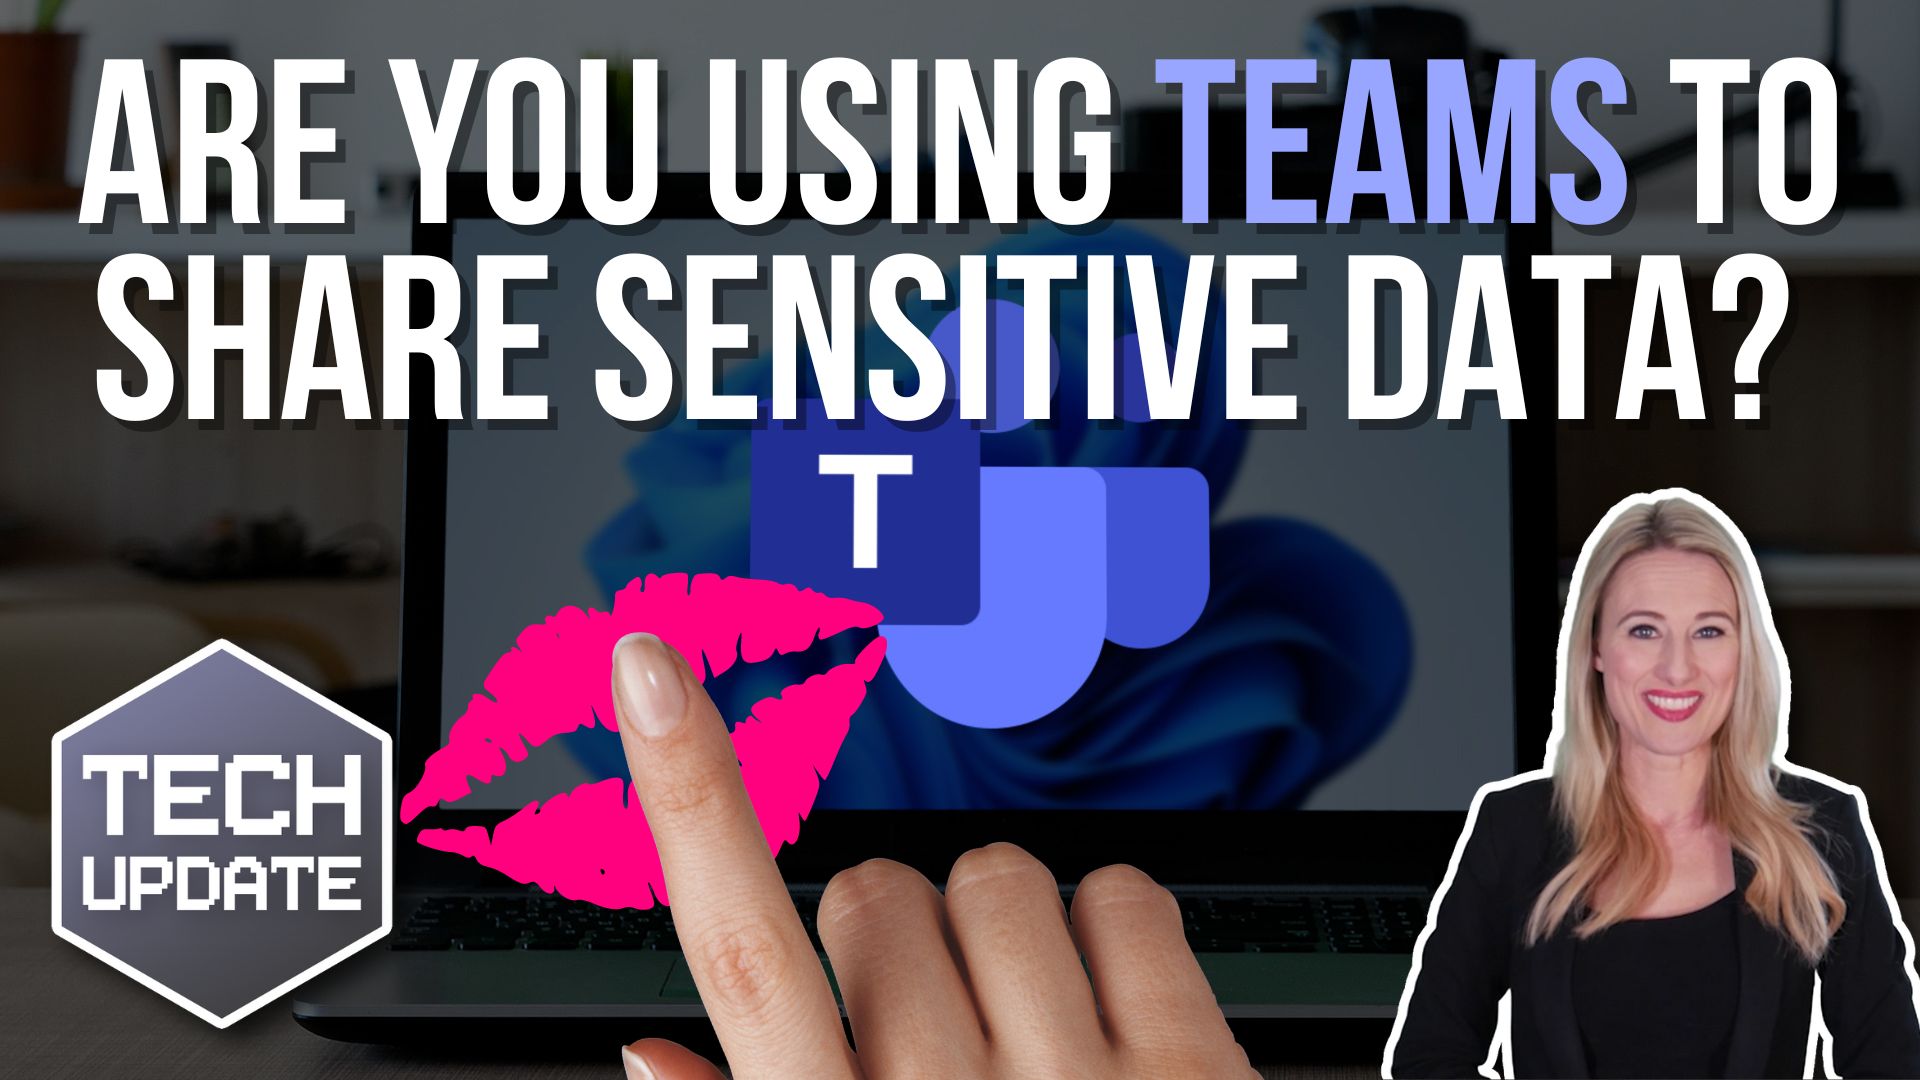 Are you using Teams to share sensitive data?